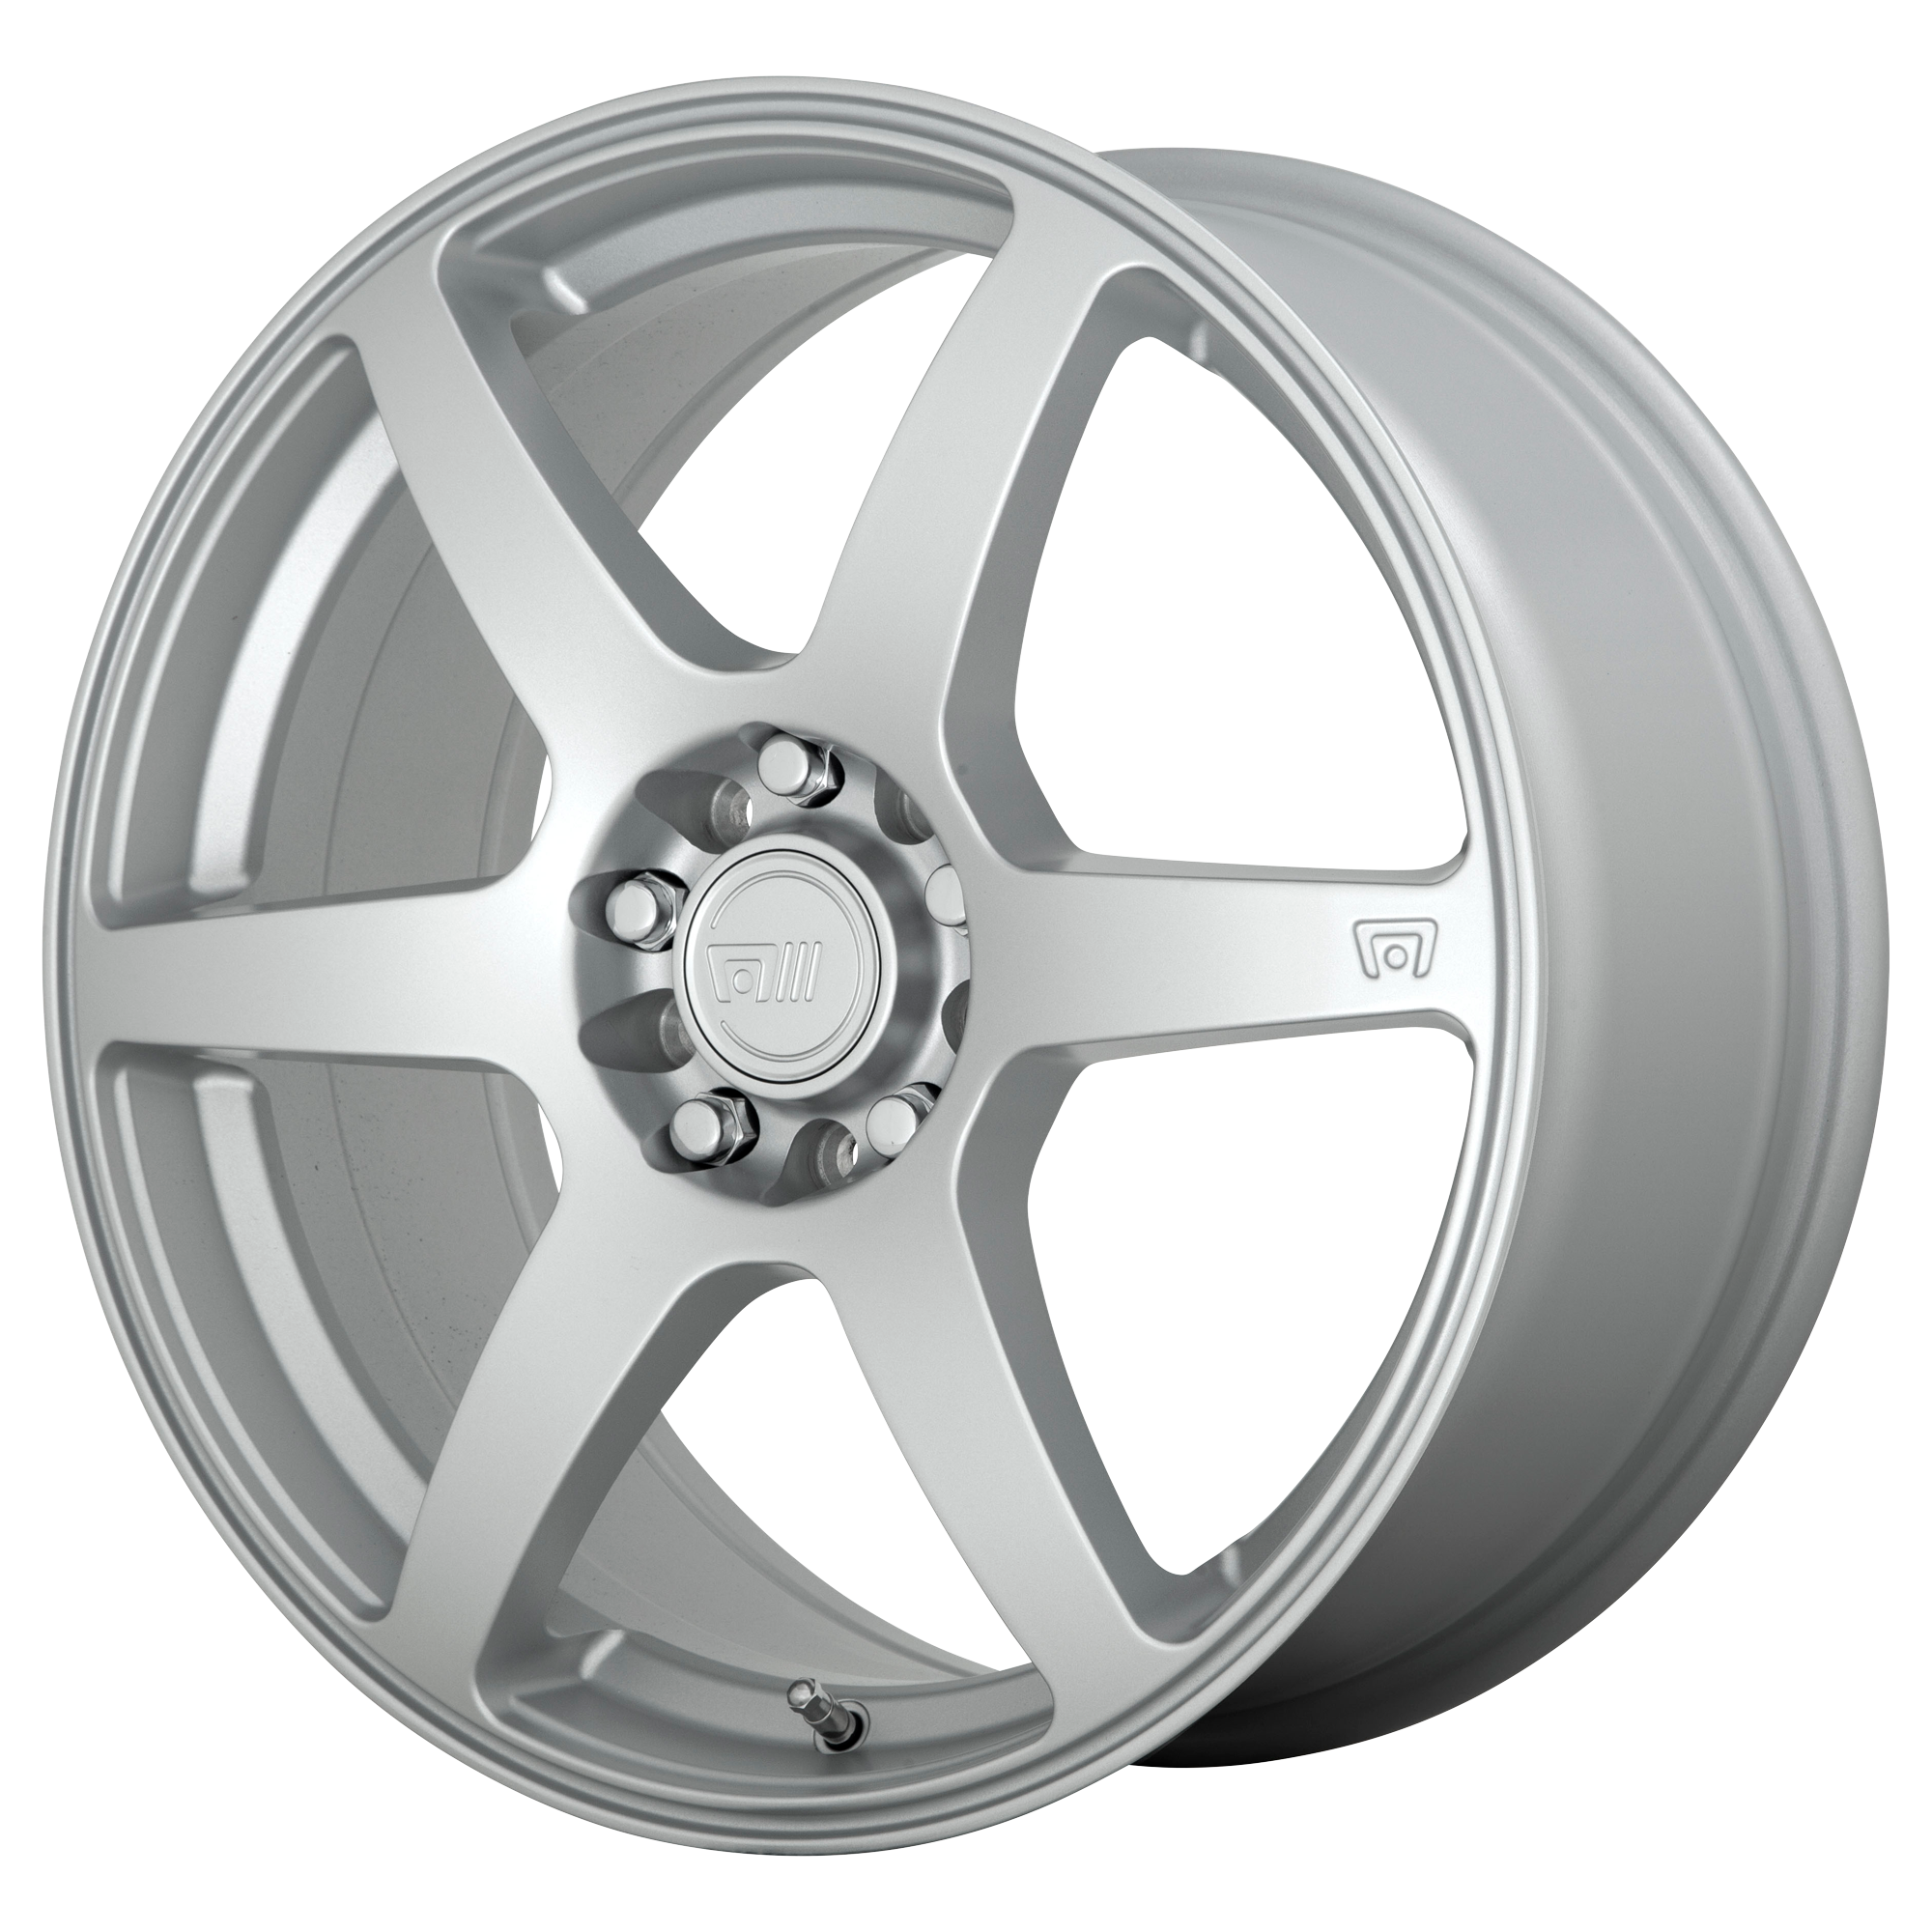 CS6 17x7 4x100.00/4x114.30 HYPER SILVER (40 mm) - Tires and Engine Performance